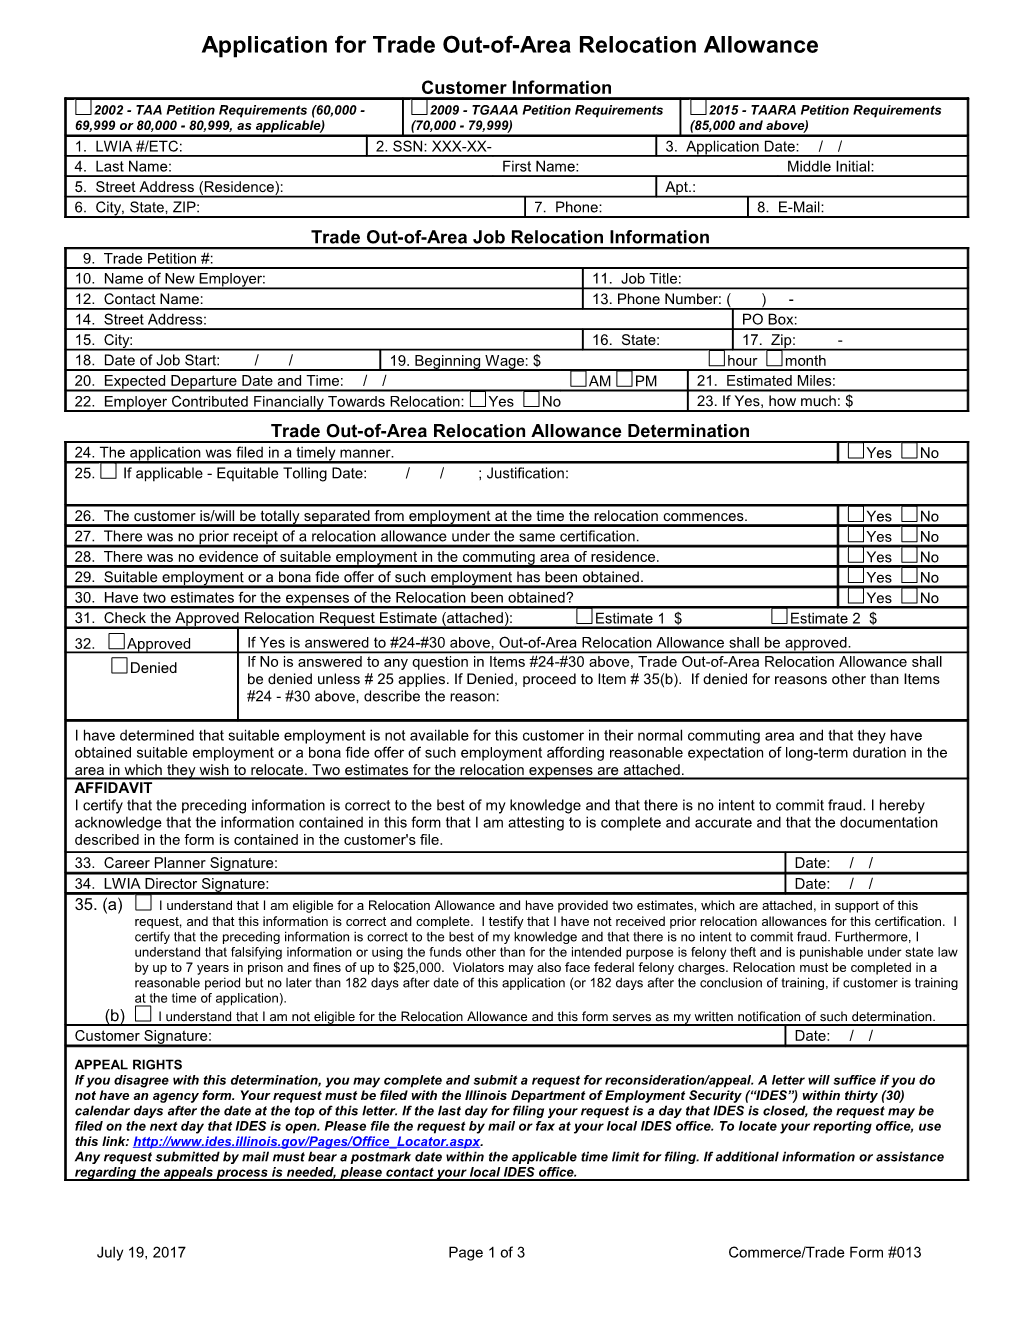 Form #013 Application for Trade Out-Of-Area Relocation Allowance (MS Word) 3-01-14